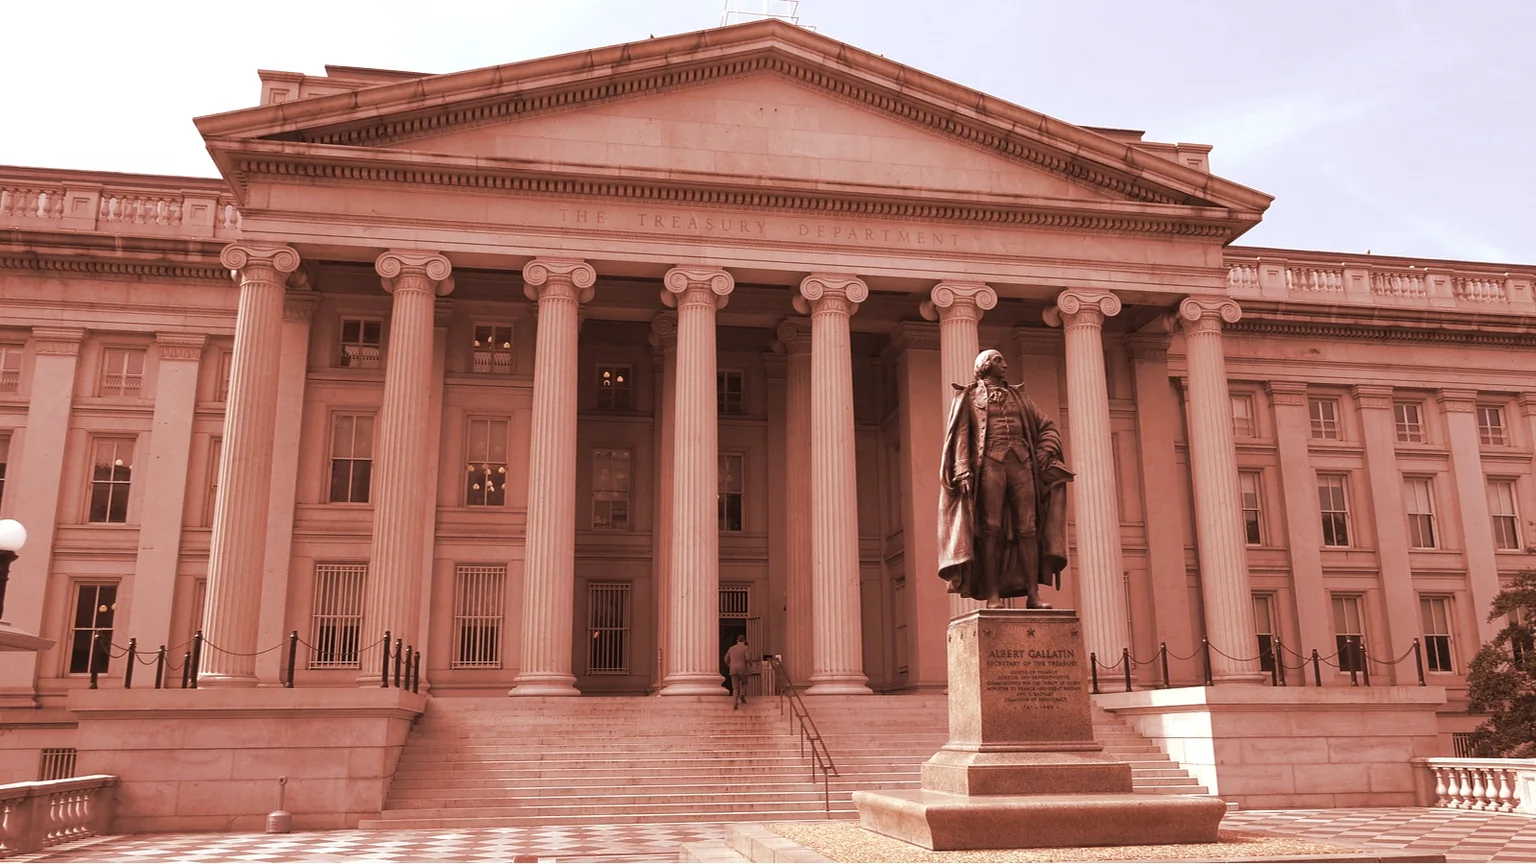 The United States Department of the Treasury. Image: Shutterstock